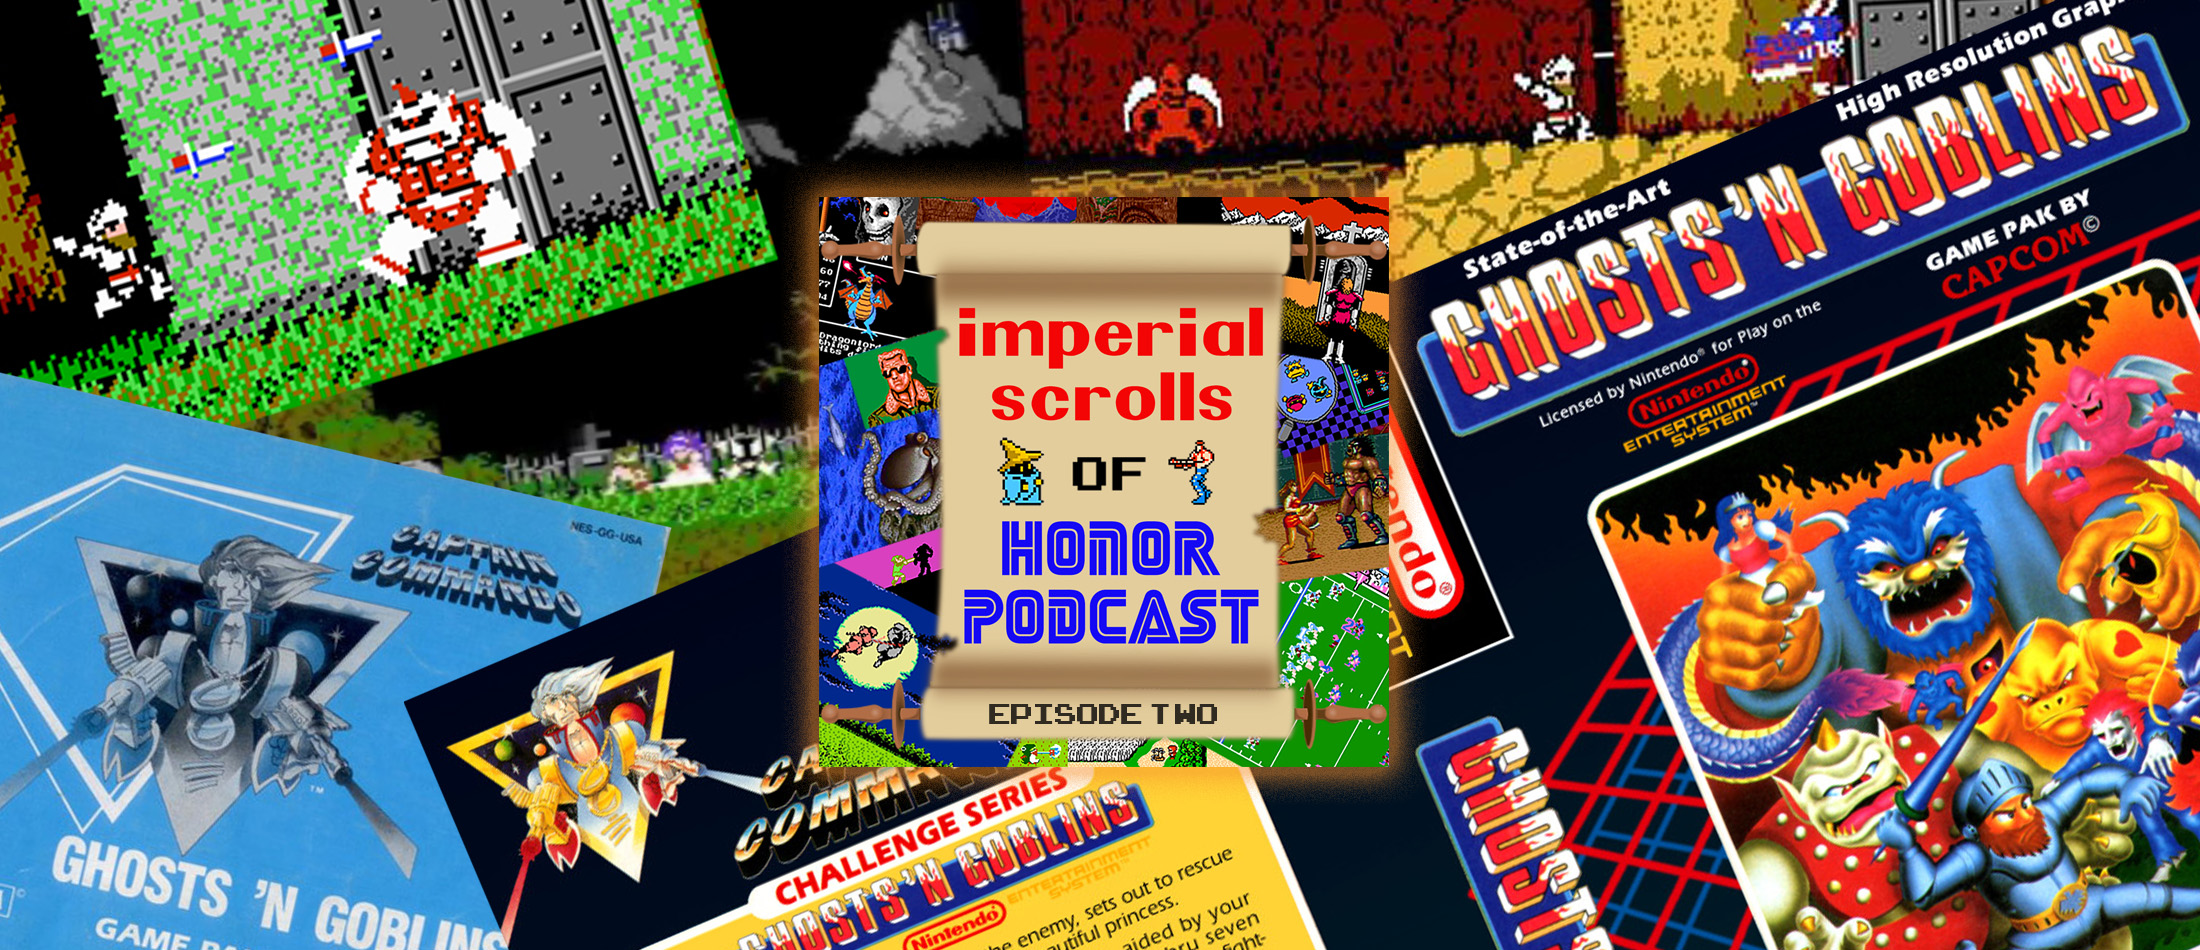 Imperial Scrolls of Honor Podcast - Episode 2 - Ghosts 'n Goblins (NES)